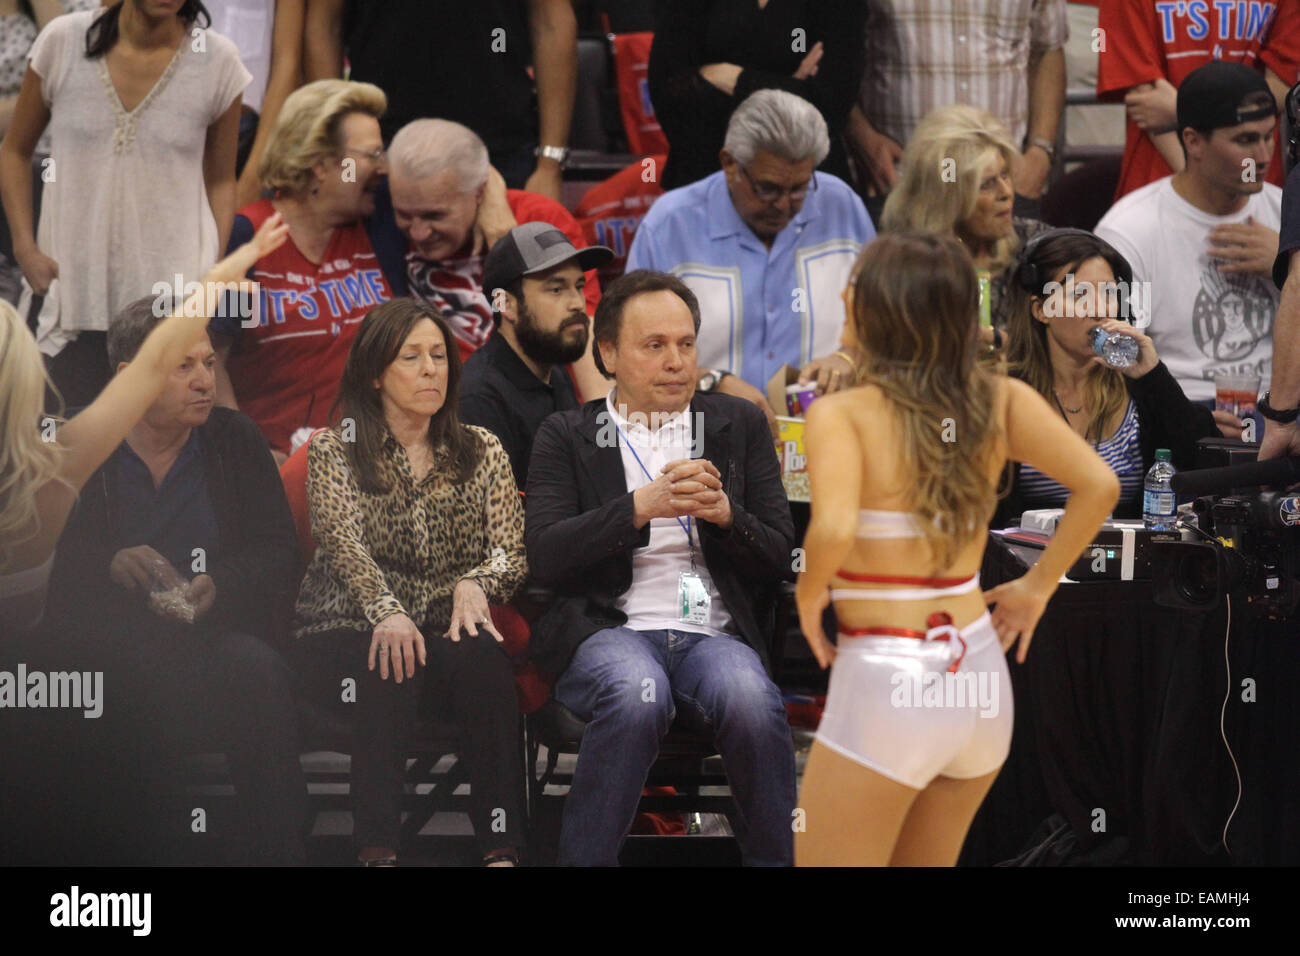 Celebrities courtside at the Los Angeles Clippers NBA basketball game against The Oklahoma City Thunder. The Thunder defeated the Clippers by the final score of 104-98 in game 6 of the Western Conference Semifinals at Staples Center in downtown Los Angele Stock Photo